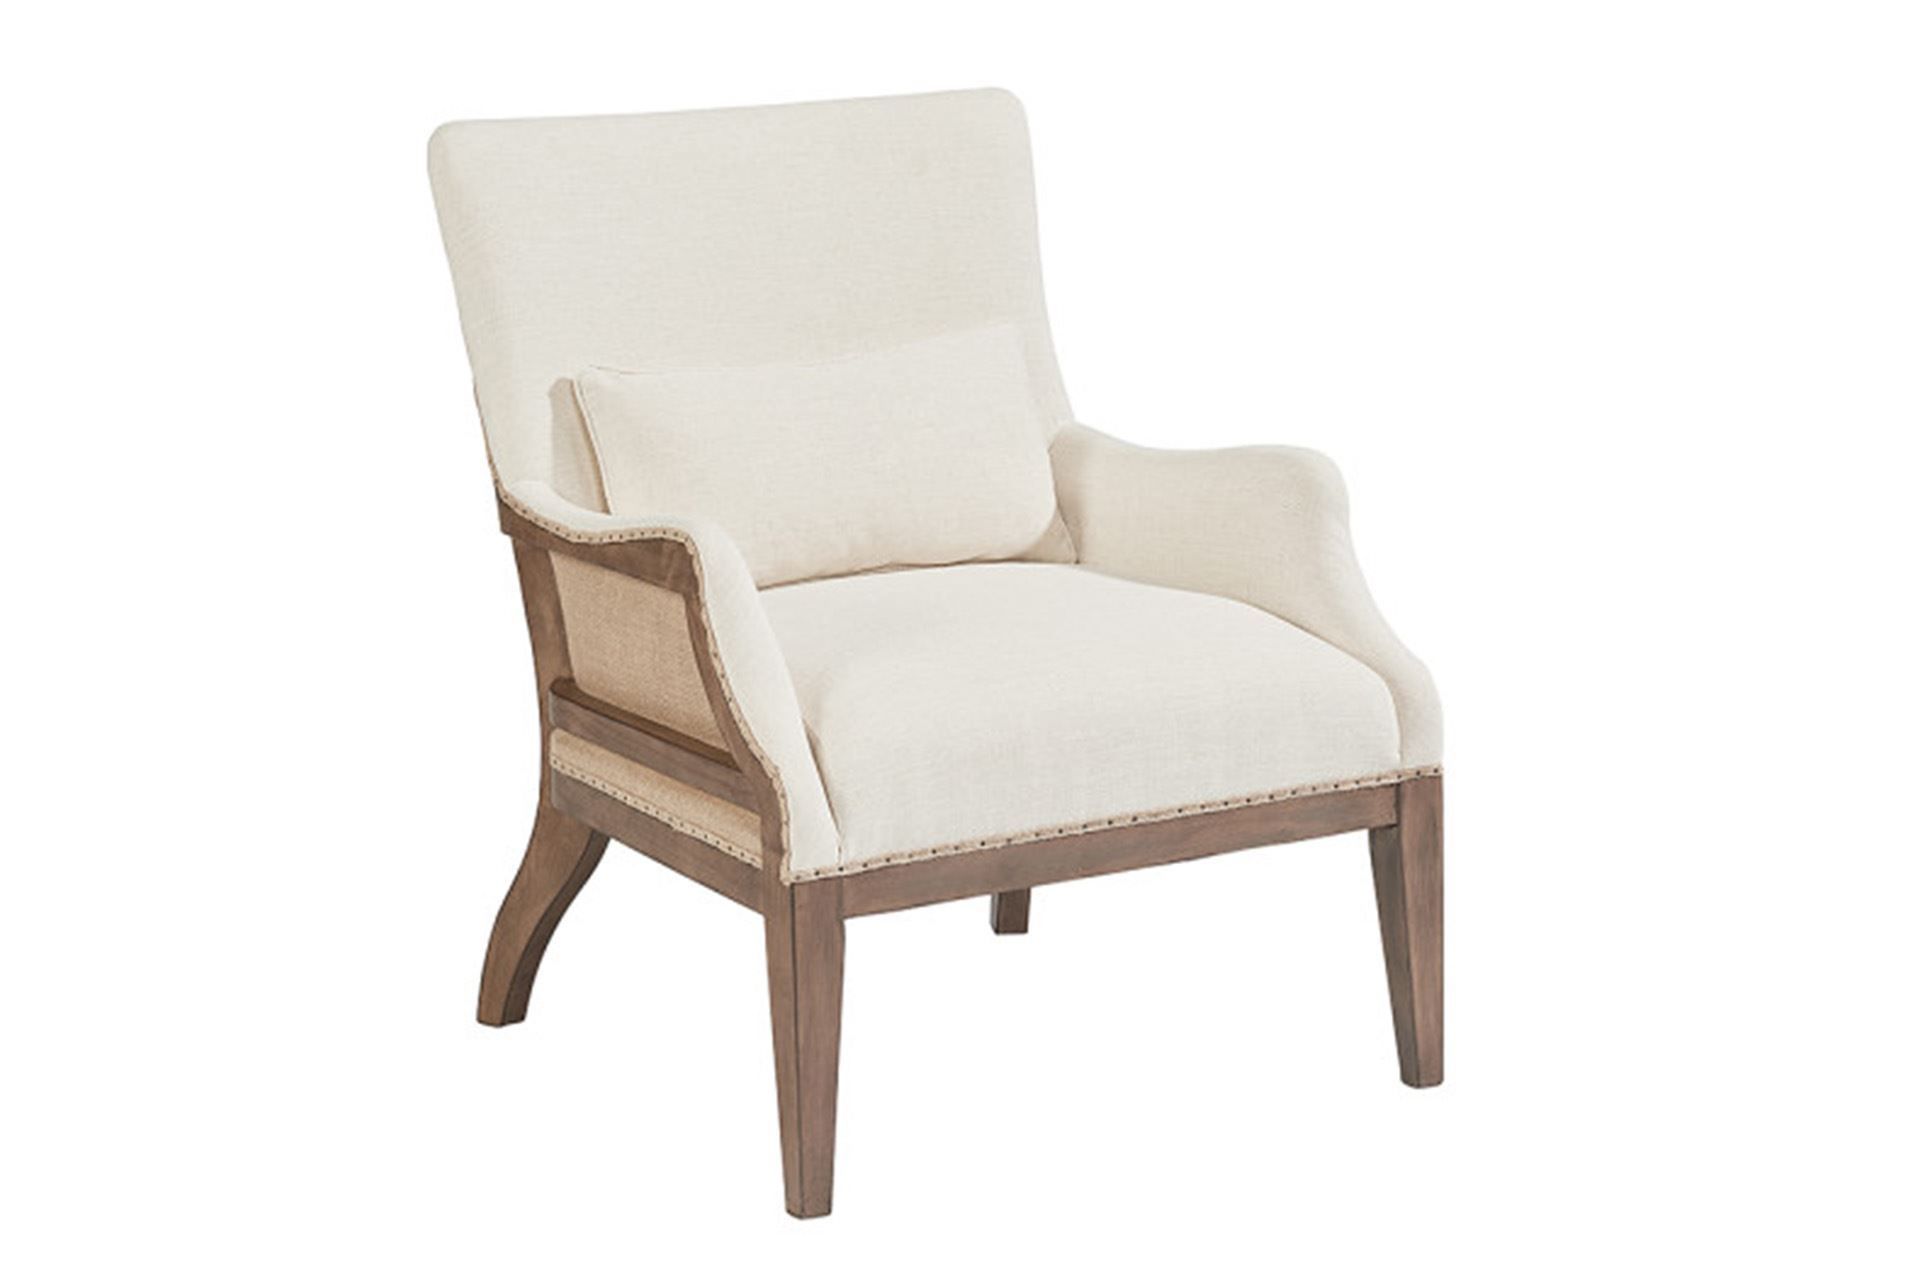 Renew Accent Chair Demonstrates A Less Is More Quality With Its With Magnolia Home Paradigm Sofa Chairs By Joanna Gaines (View 14 of 20)